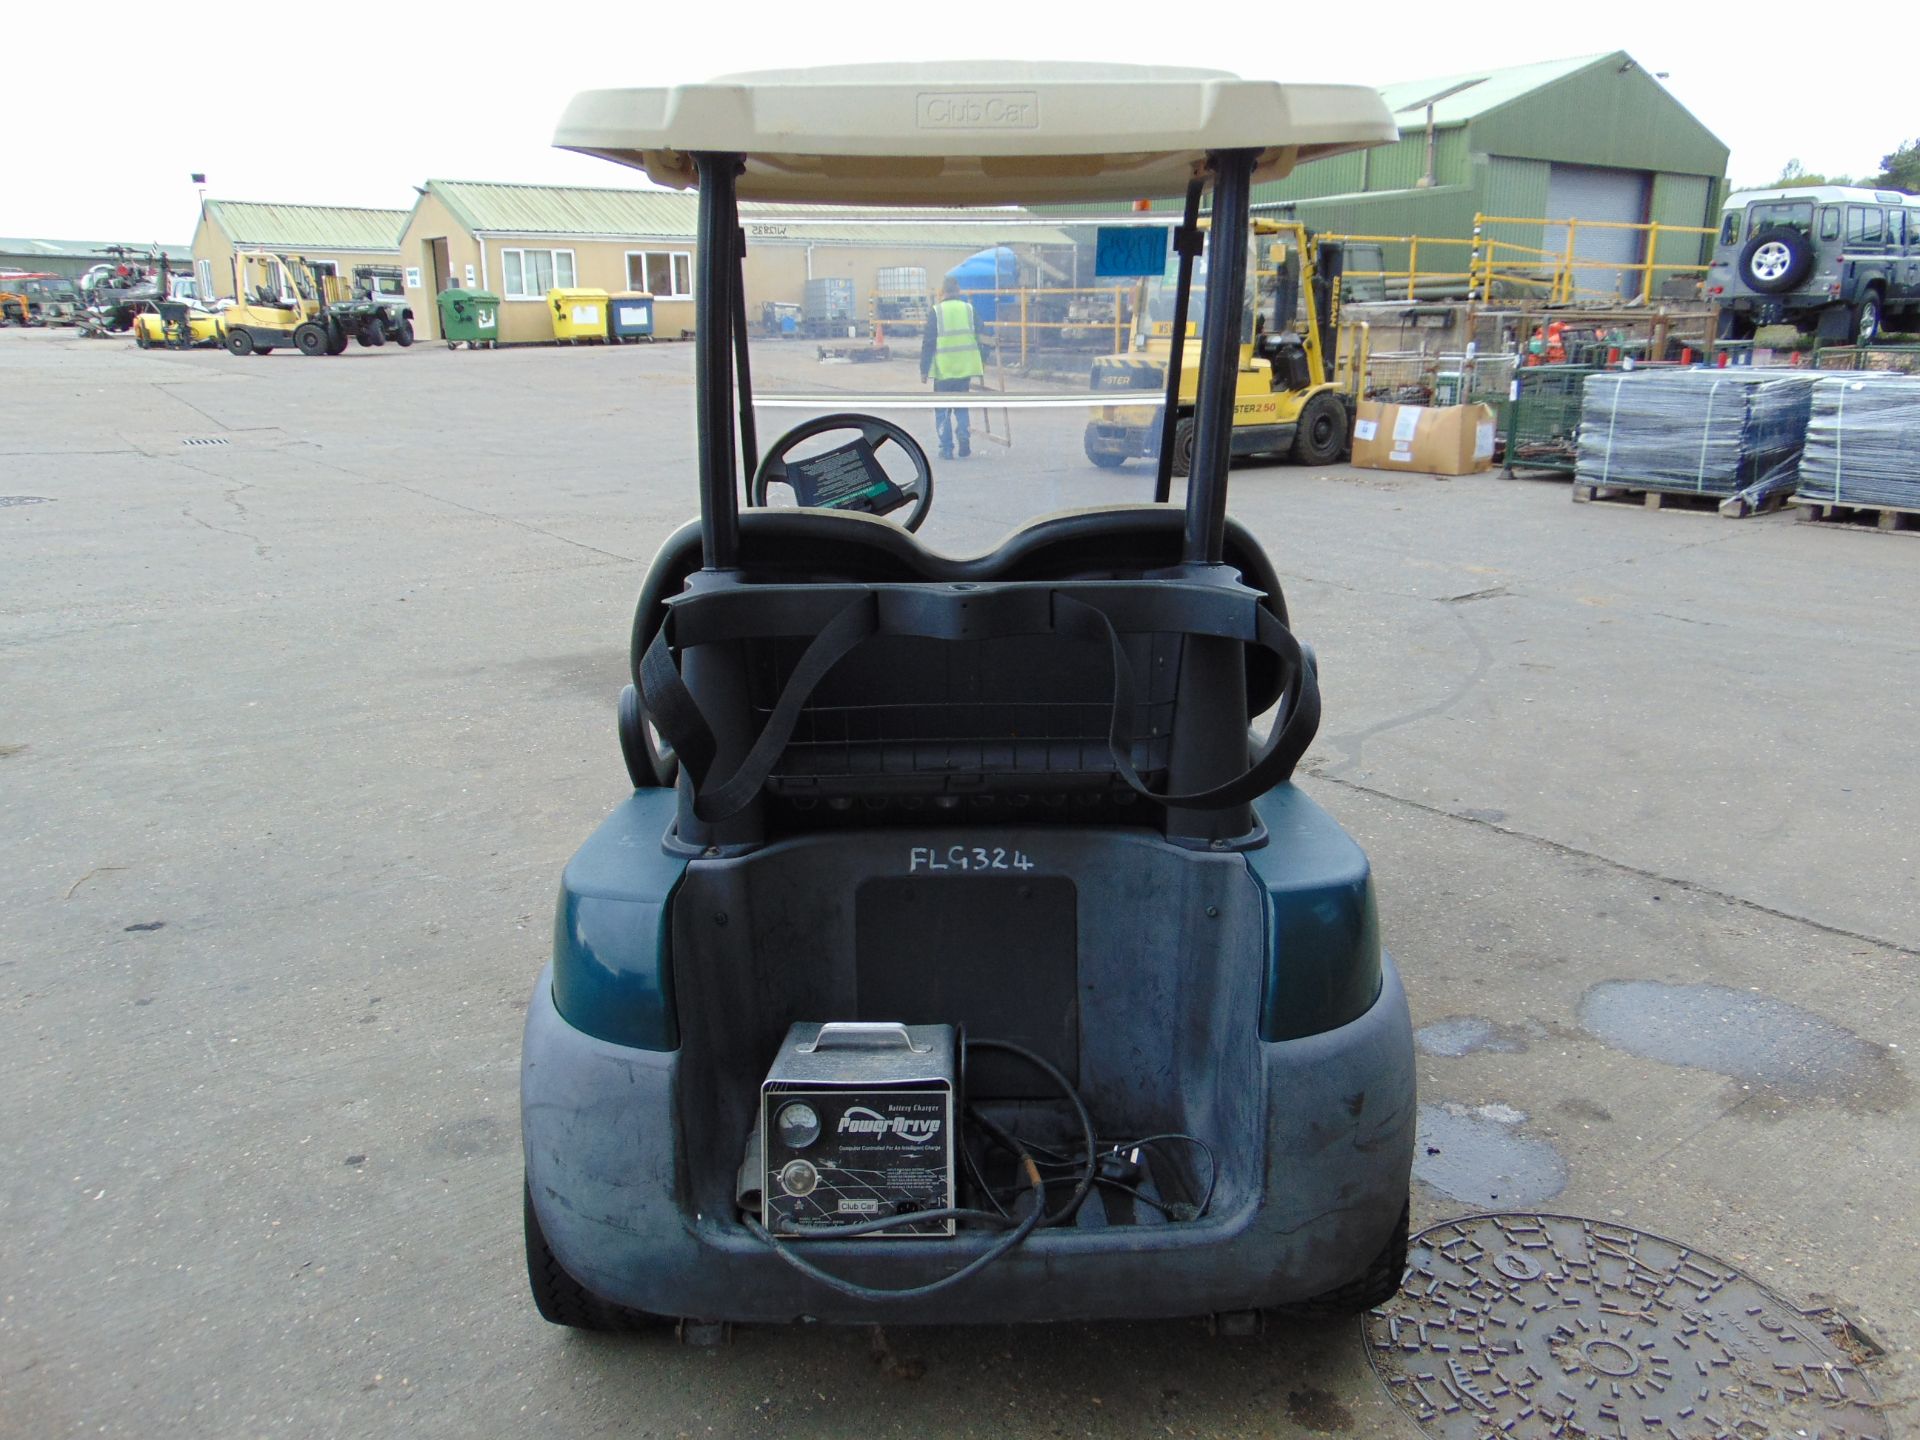 Club Car 2 Seat Electric Golf Buggy C/W Battery Charger - Image 7 of 13